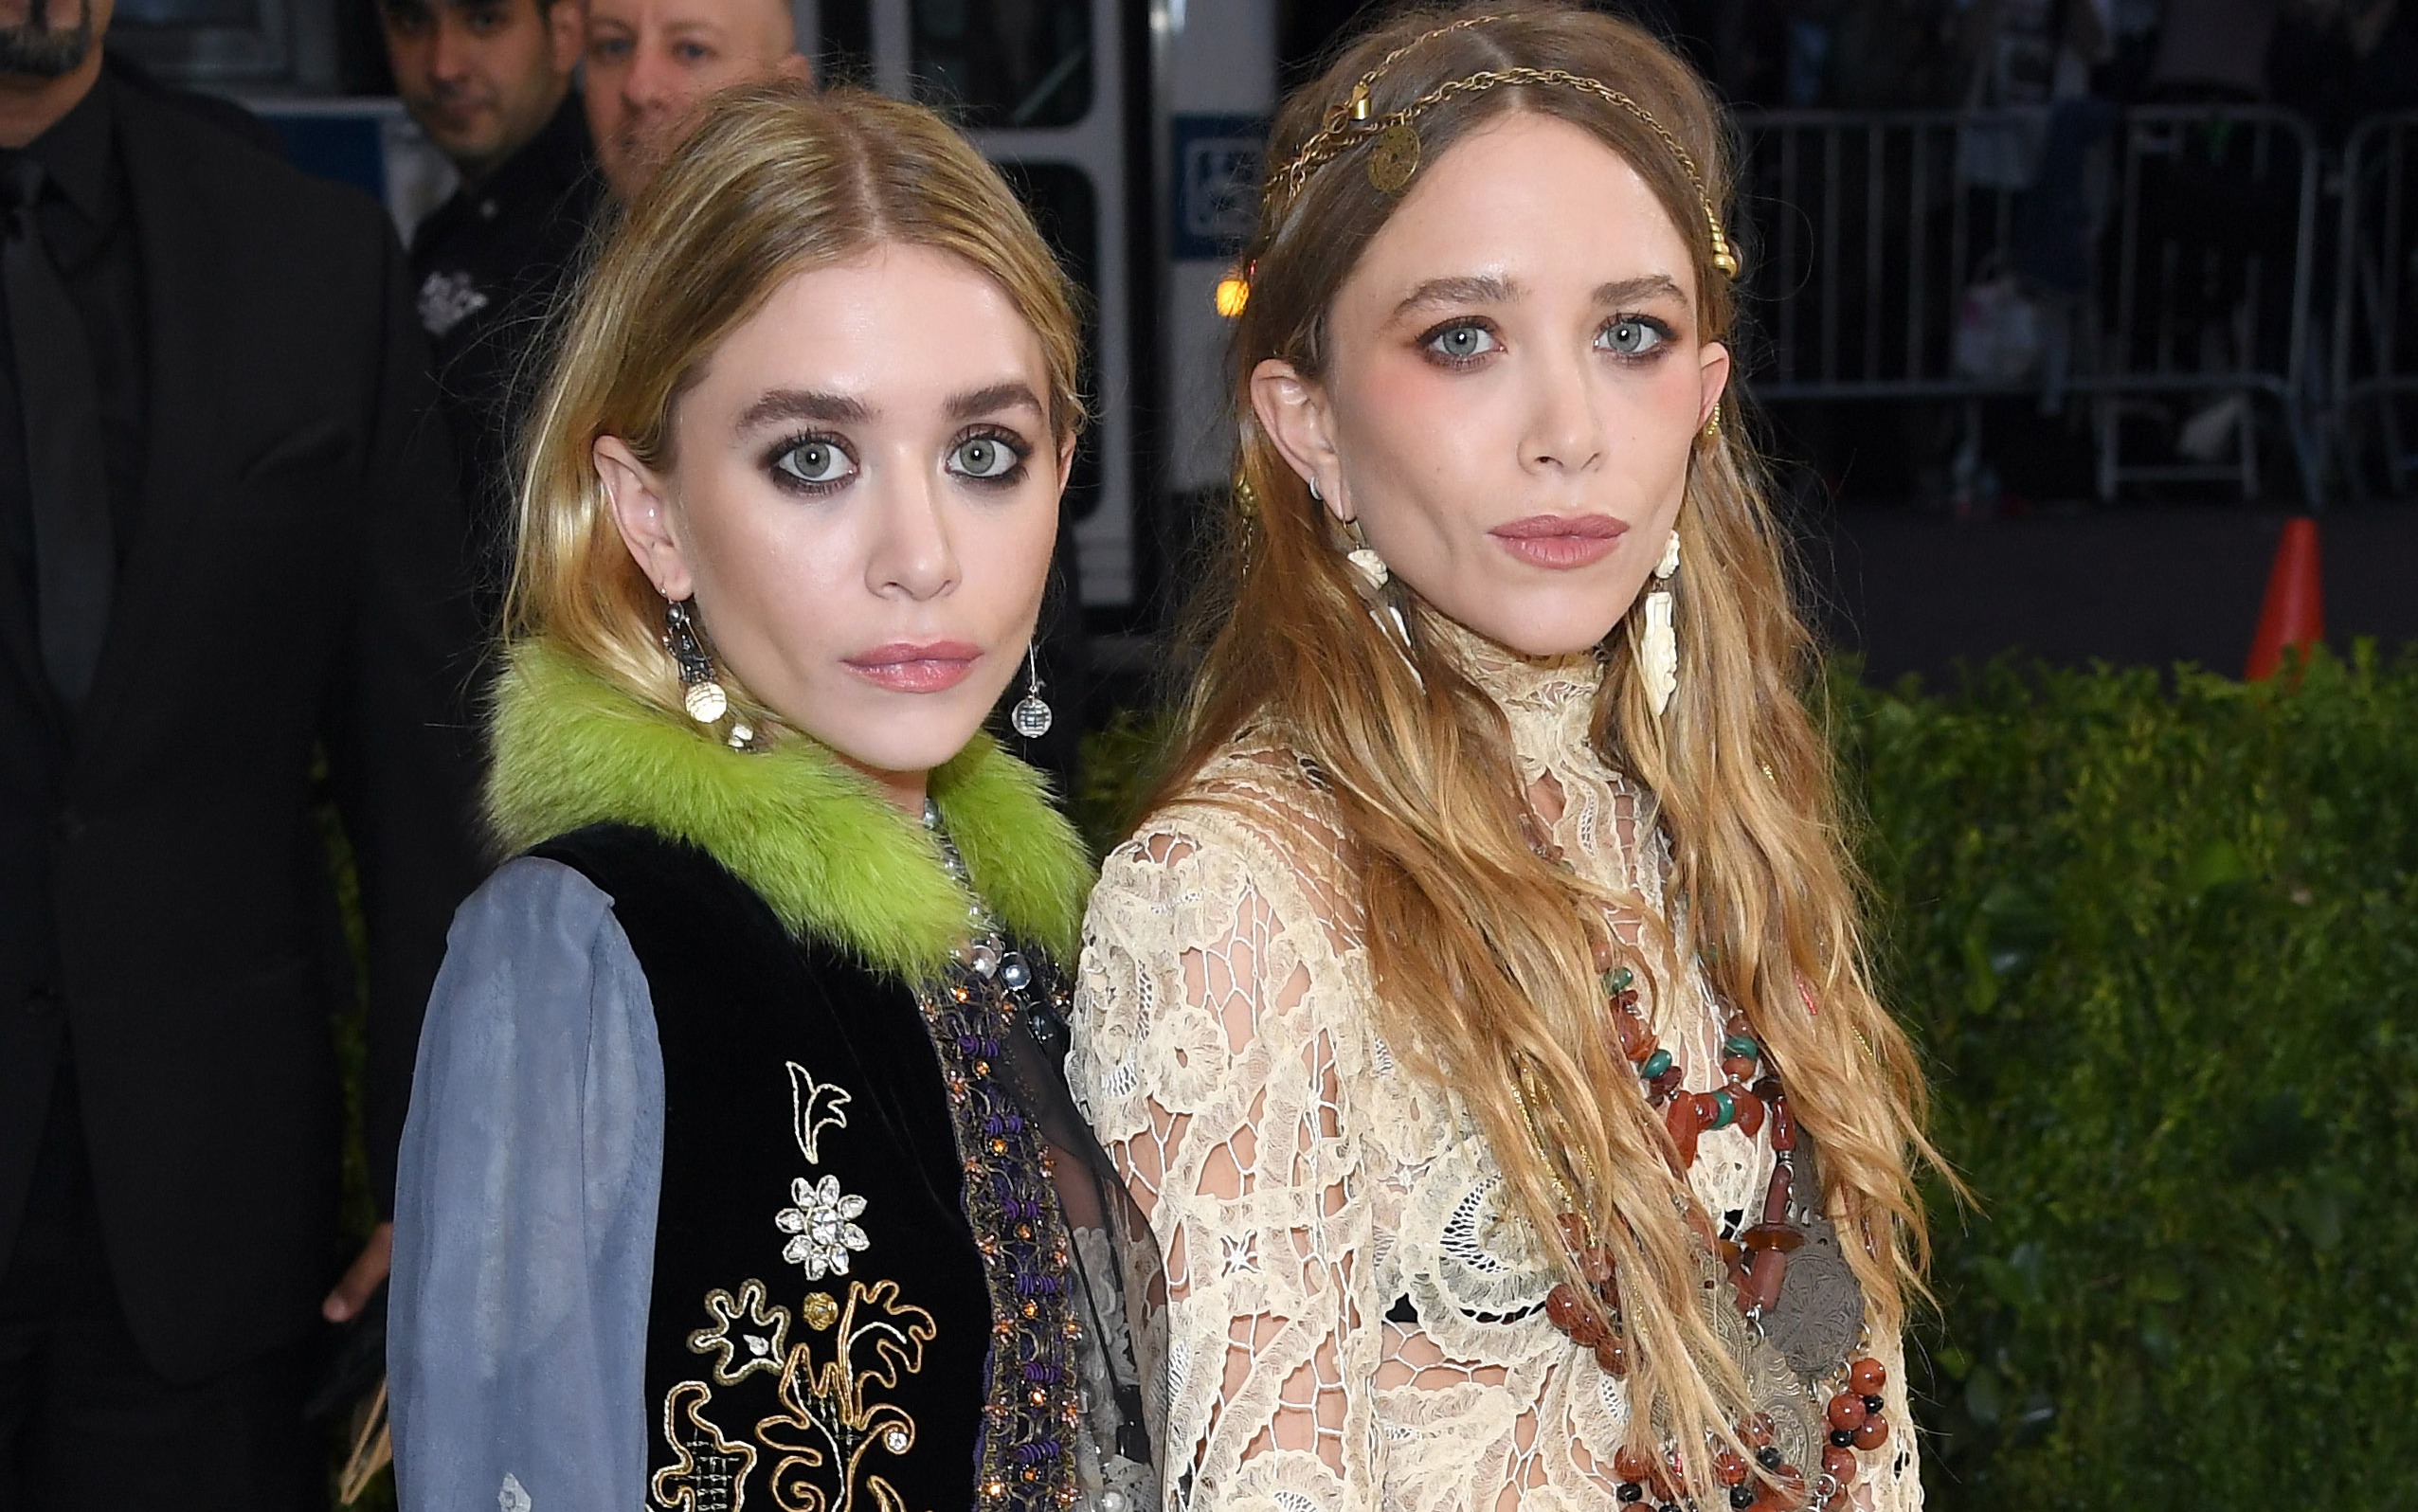 The Olsen Twins: 35 Facts You Didn't Know About Mary-Kate And Ashley